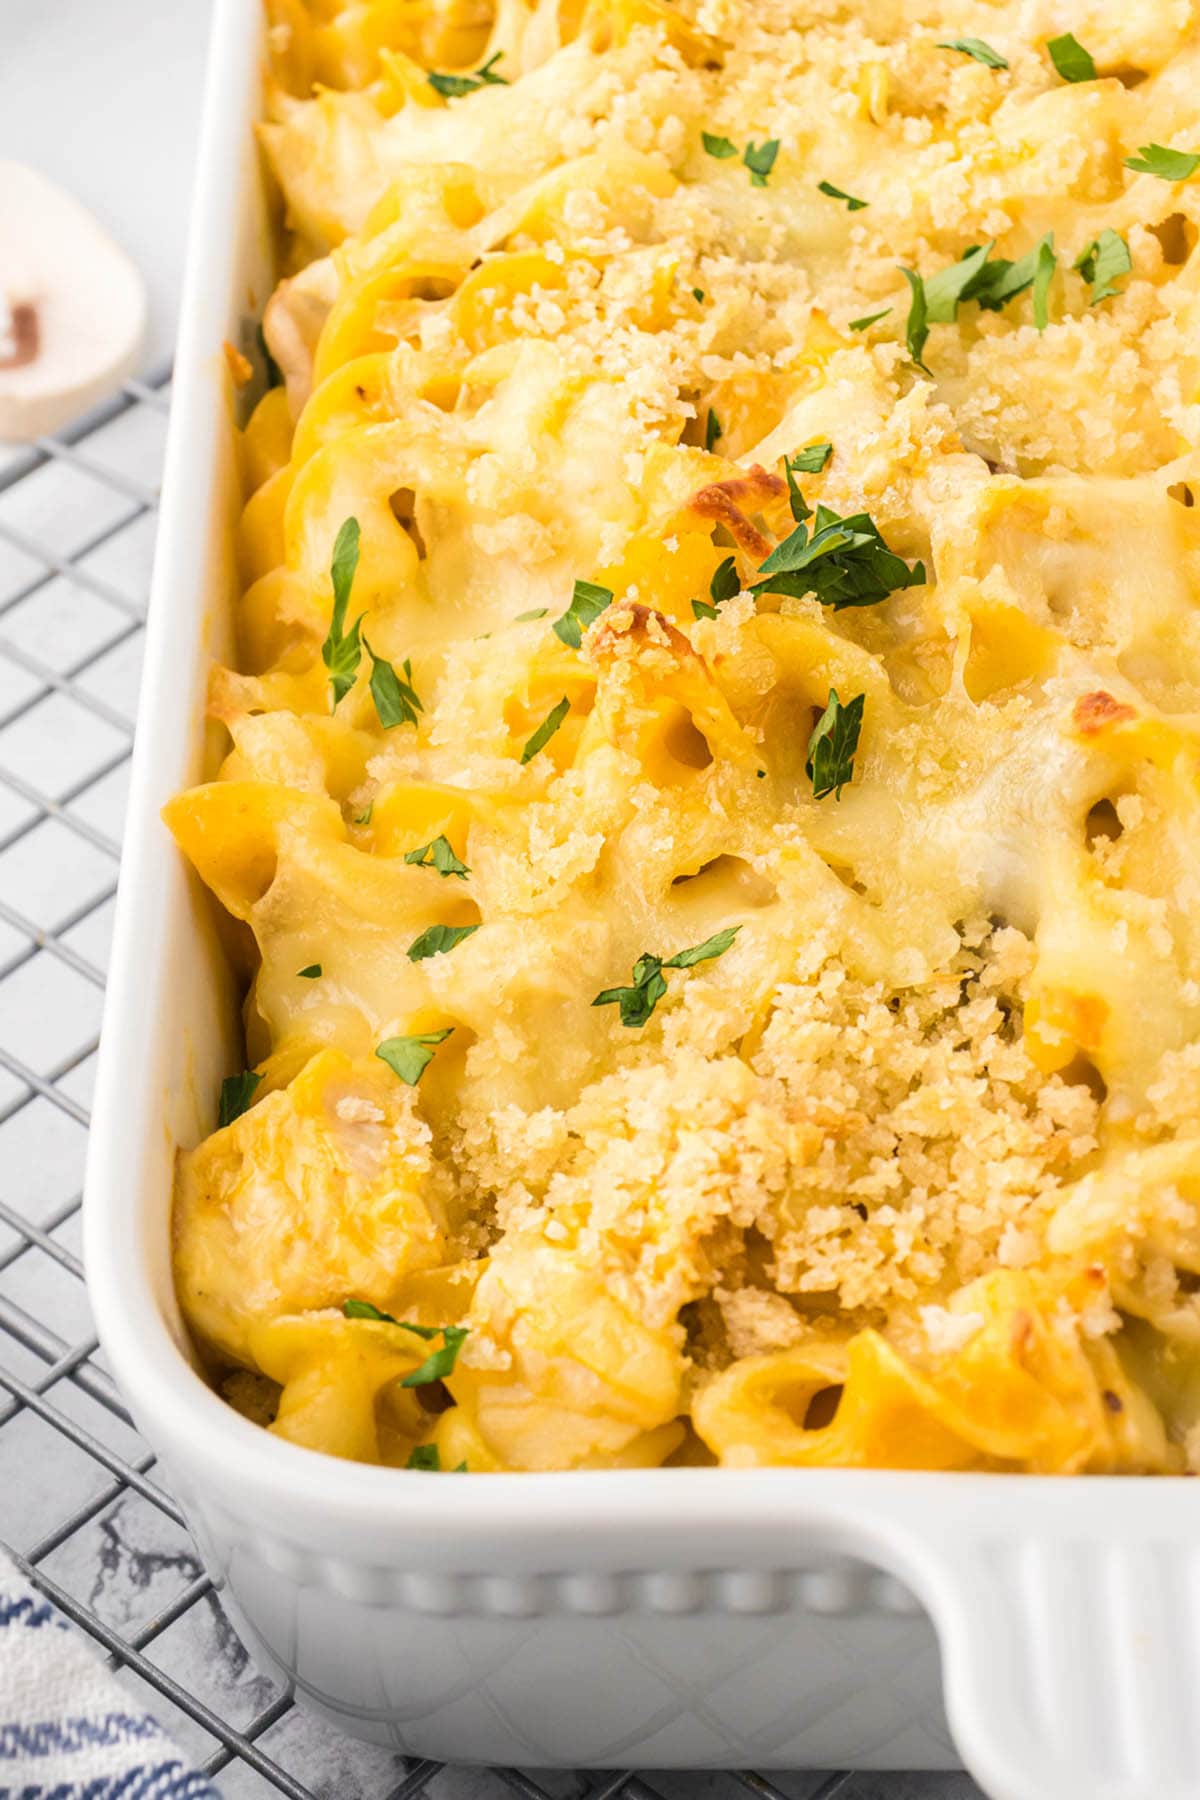 Casserole dish filled with Chicken and Mushroom pasta bake.